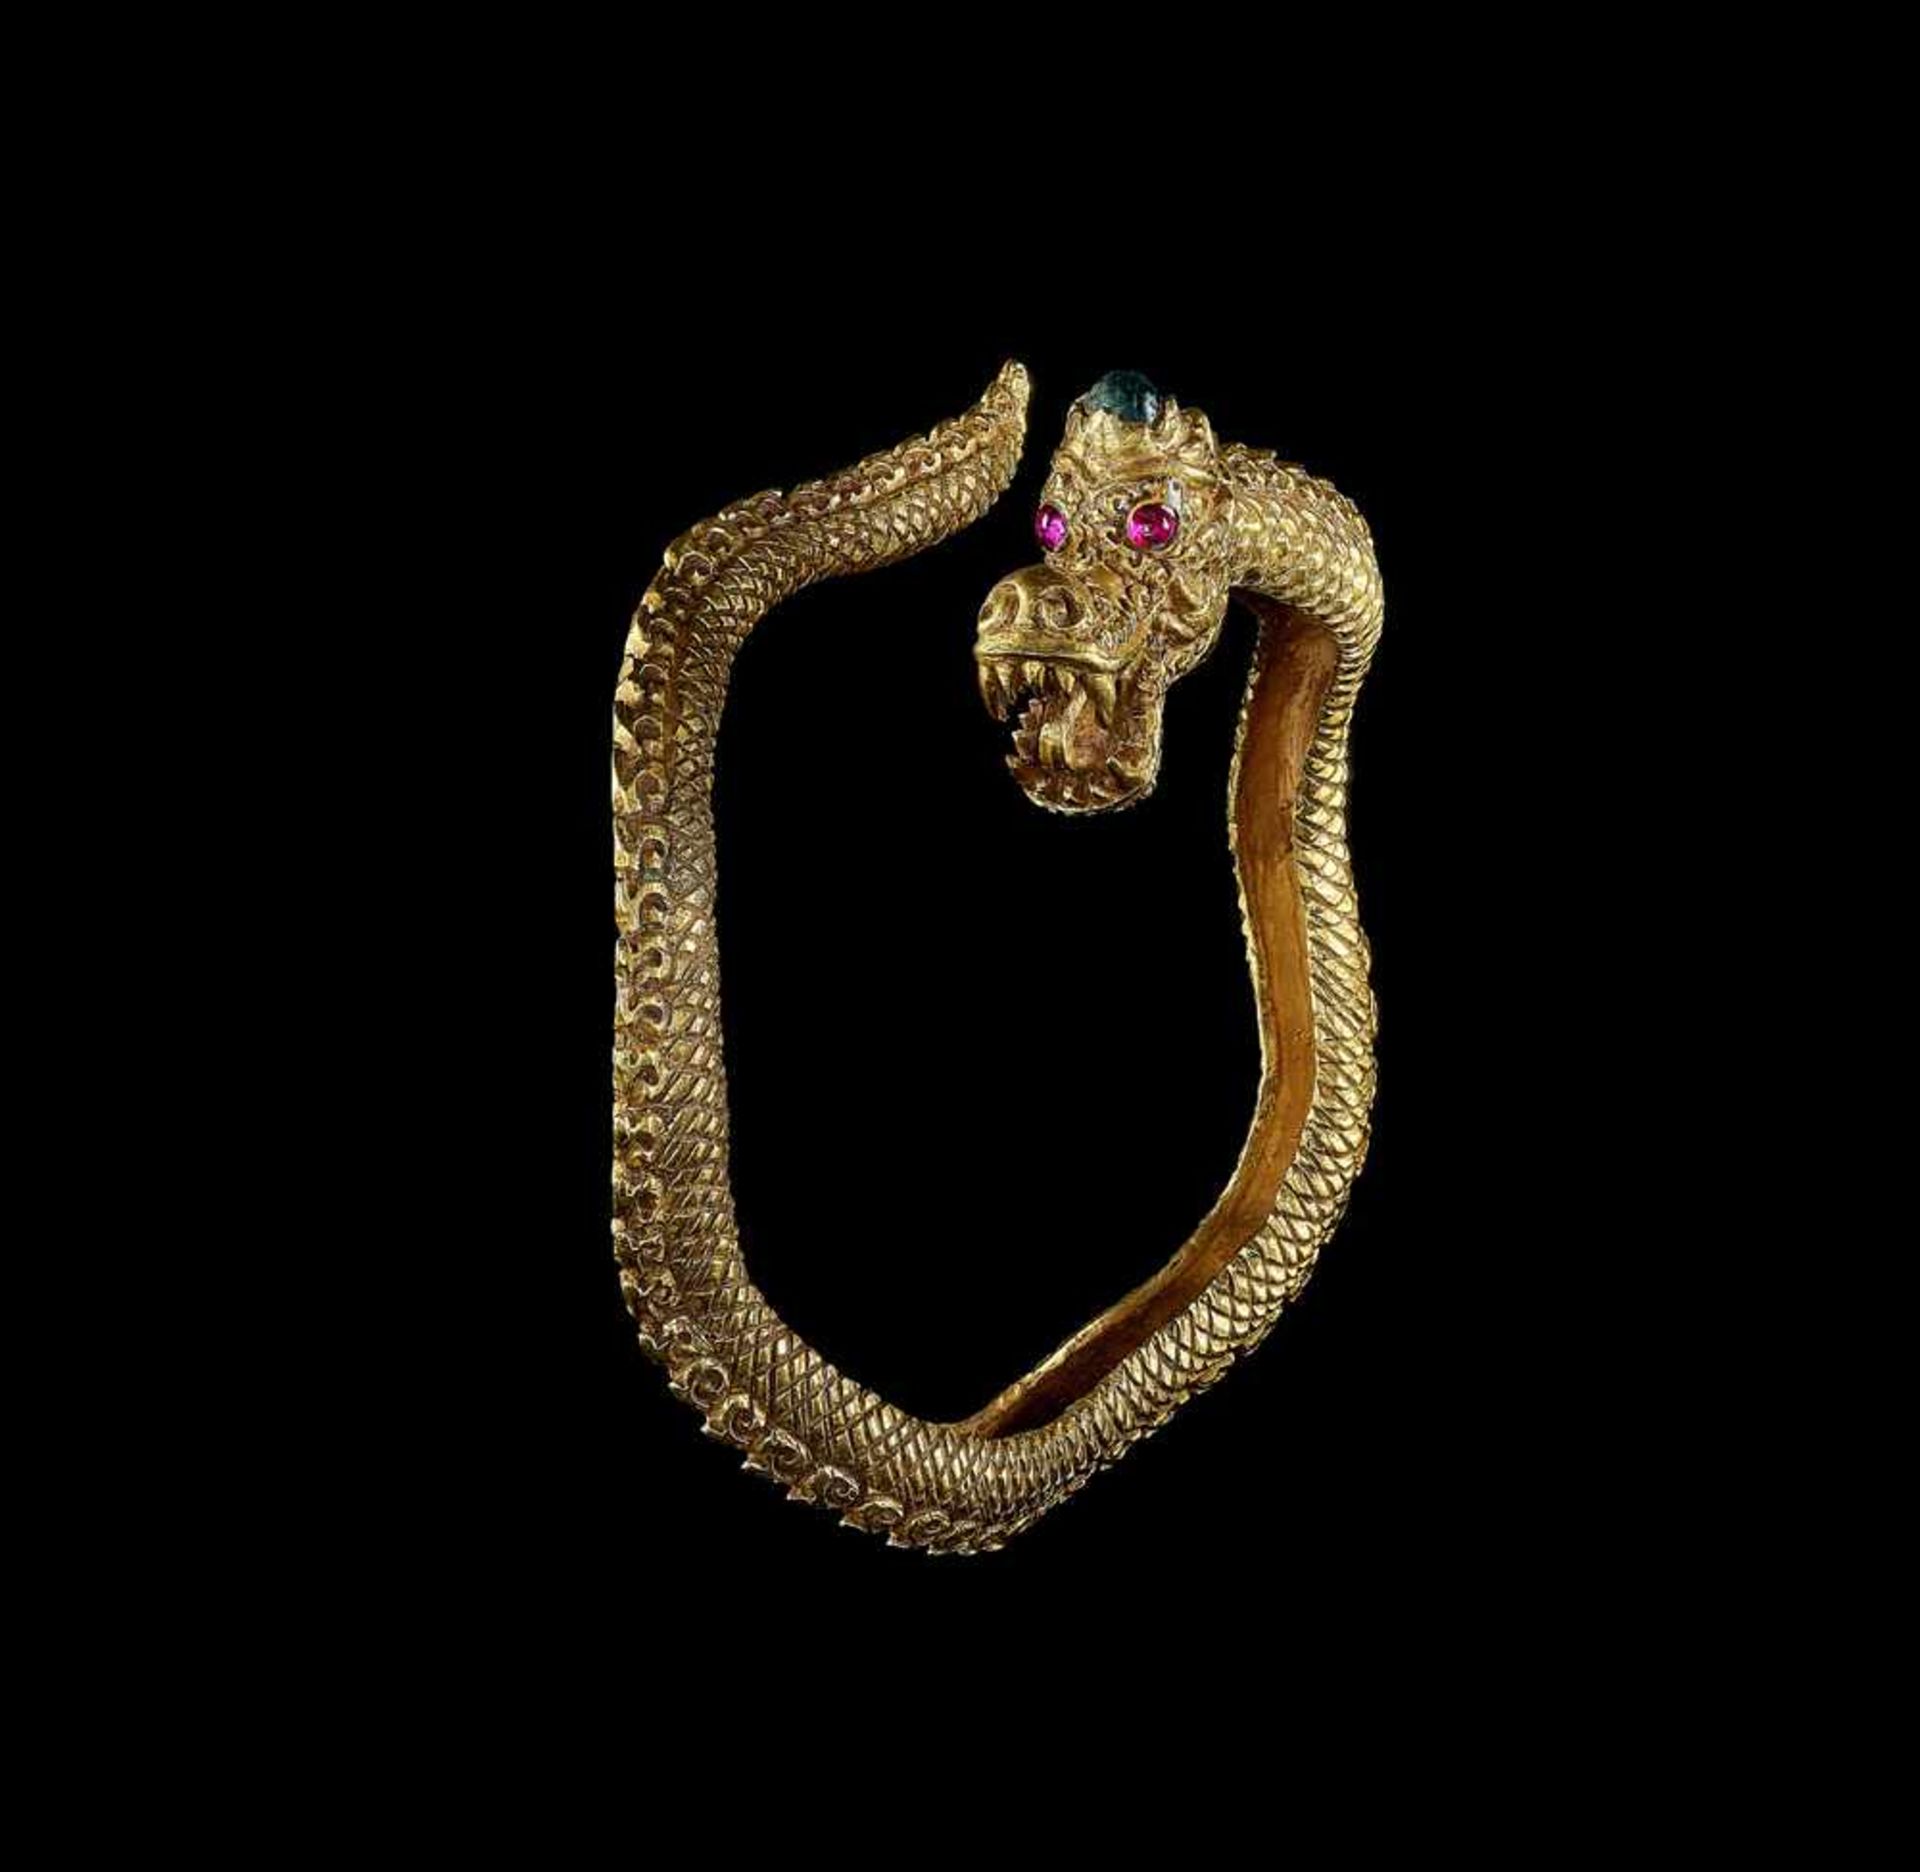 A GOLD DRAGON BANGLE WITH RUBY EYES AND A GREEN GEMSTONE Malaysia, c. 18th – 19th century. An - Image 4 of 6